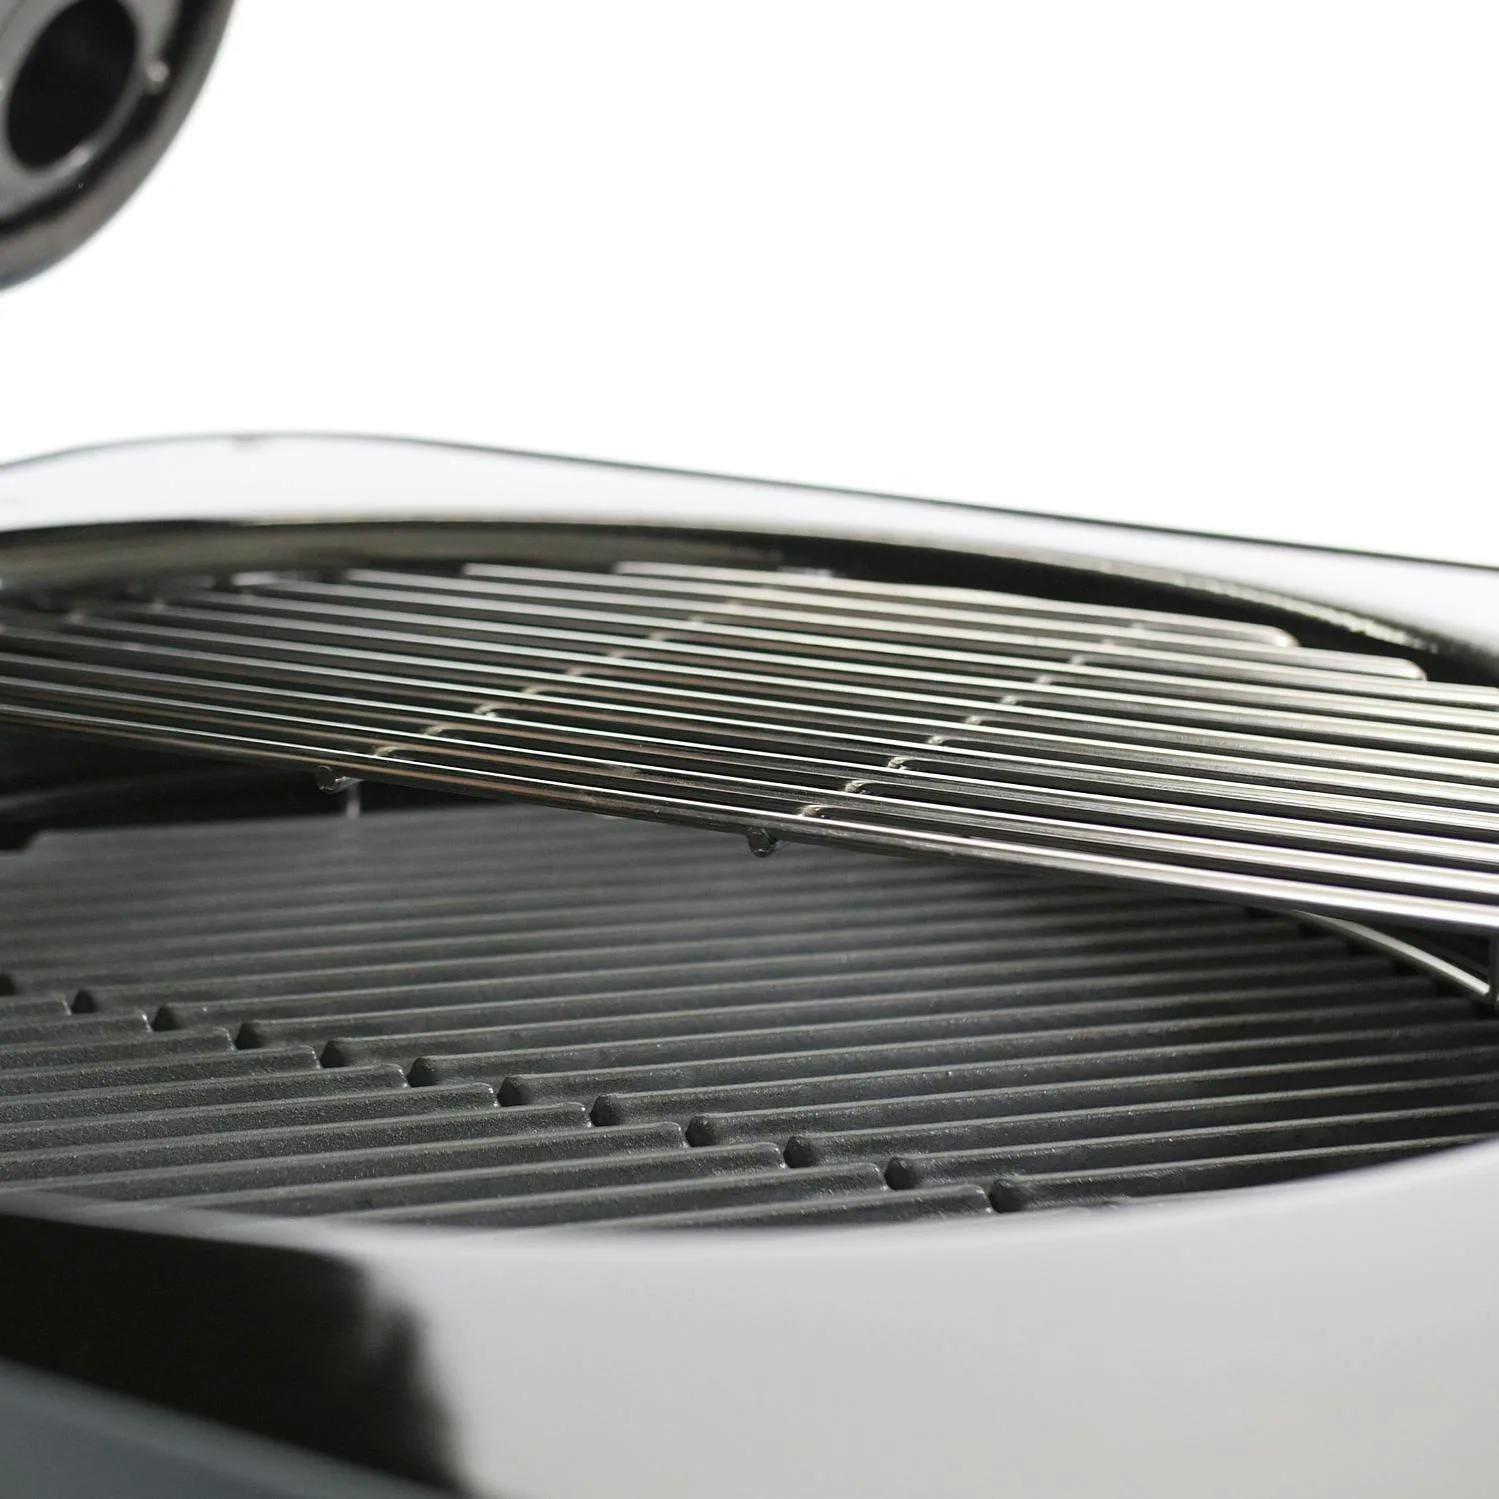 Everdure By Heston Blumenthal 4K Charcoal Grill & Smoker · Gray · 21 in.